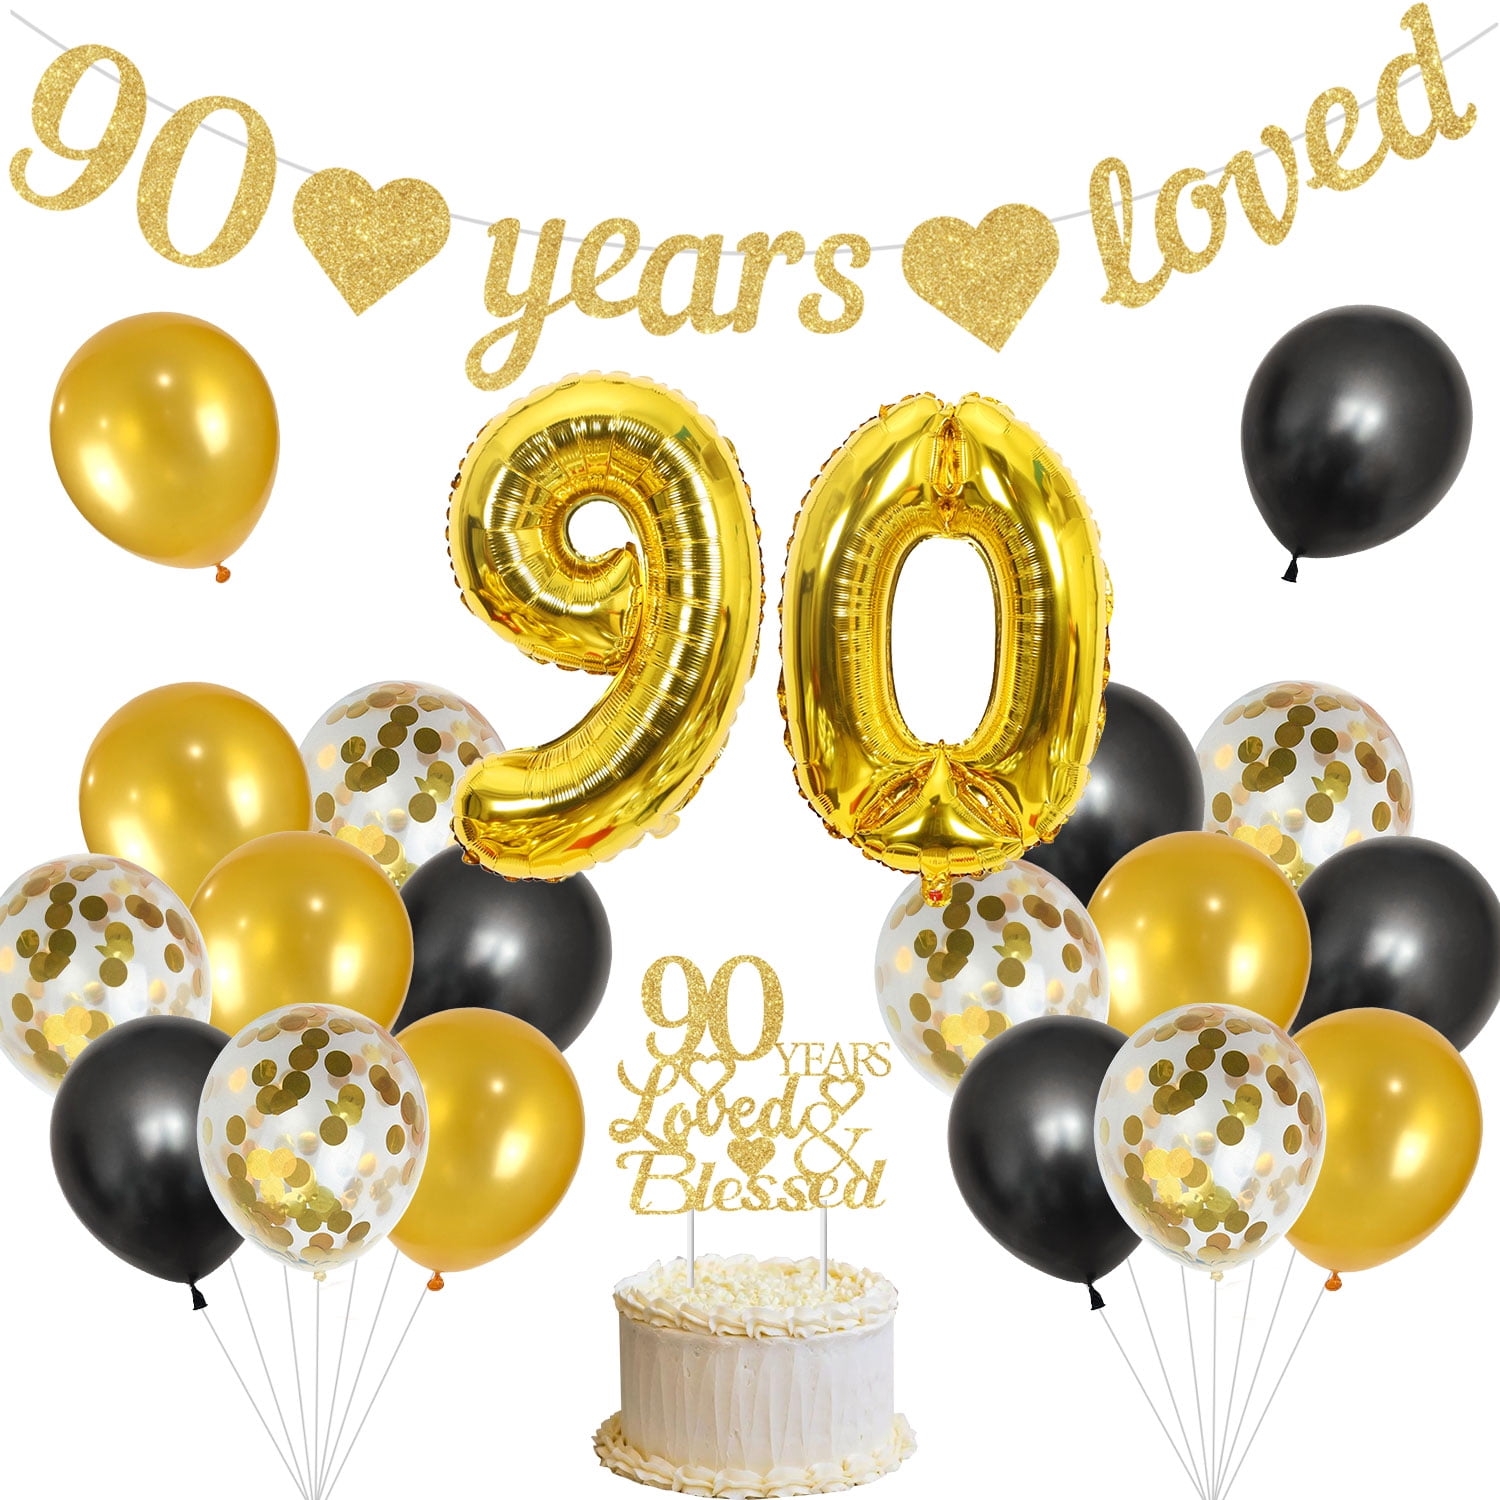 90th Birthday Decorations, Black Gold Happy 90 Birthday Party Supplies Men Women with 90 Years Loved Banner, Foil Balloon & Latex Balloon, Cake Topper for 90 Years Old Party - Walmart.com